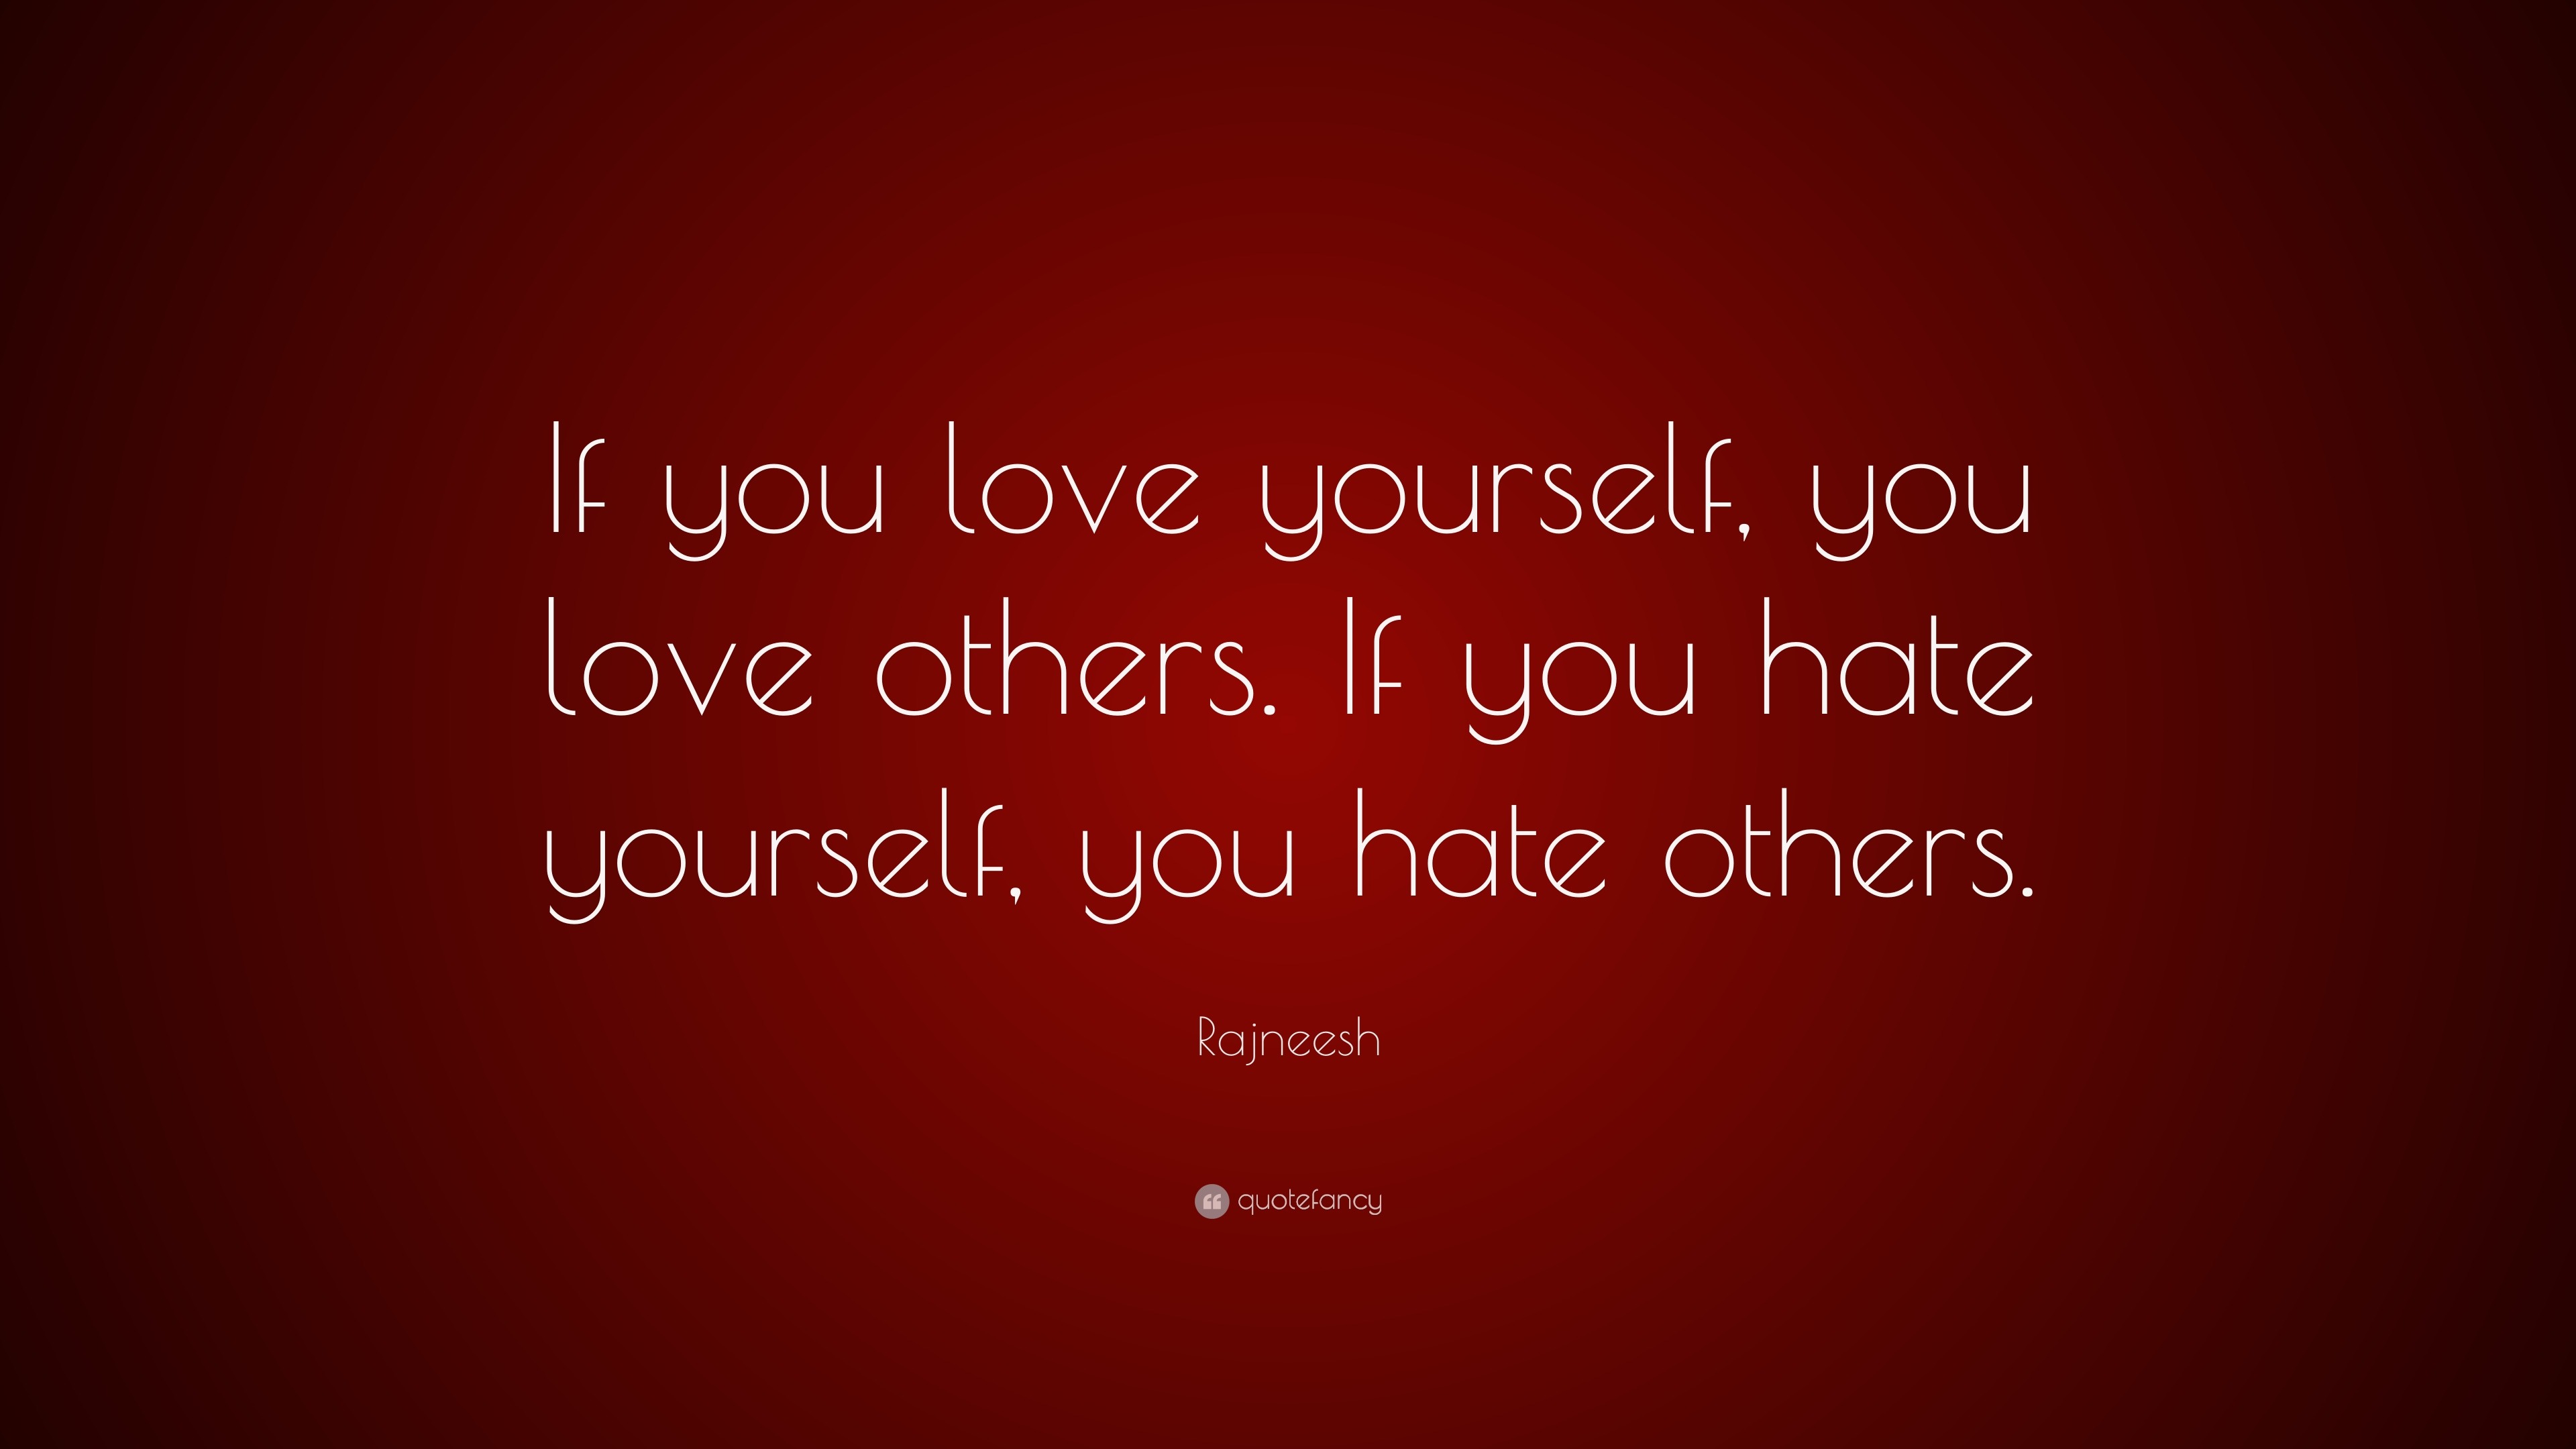 View Love Yourself Before Others Quotes PNG